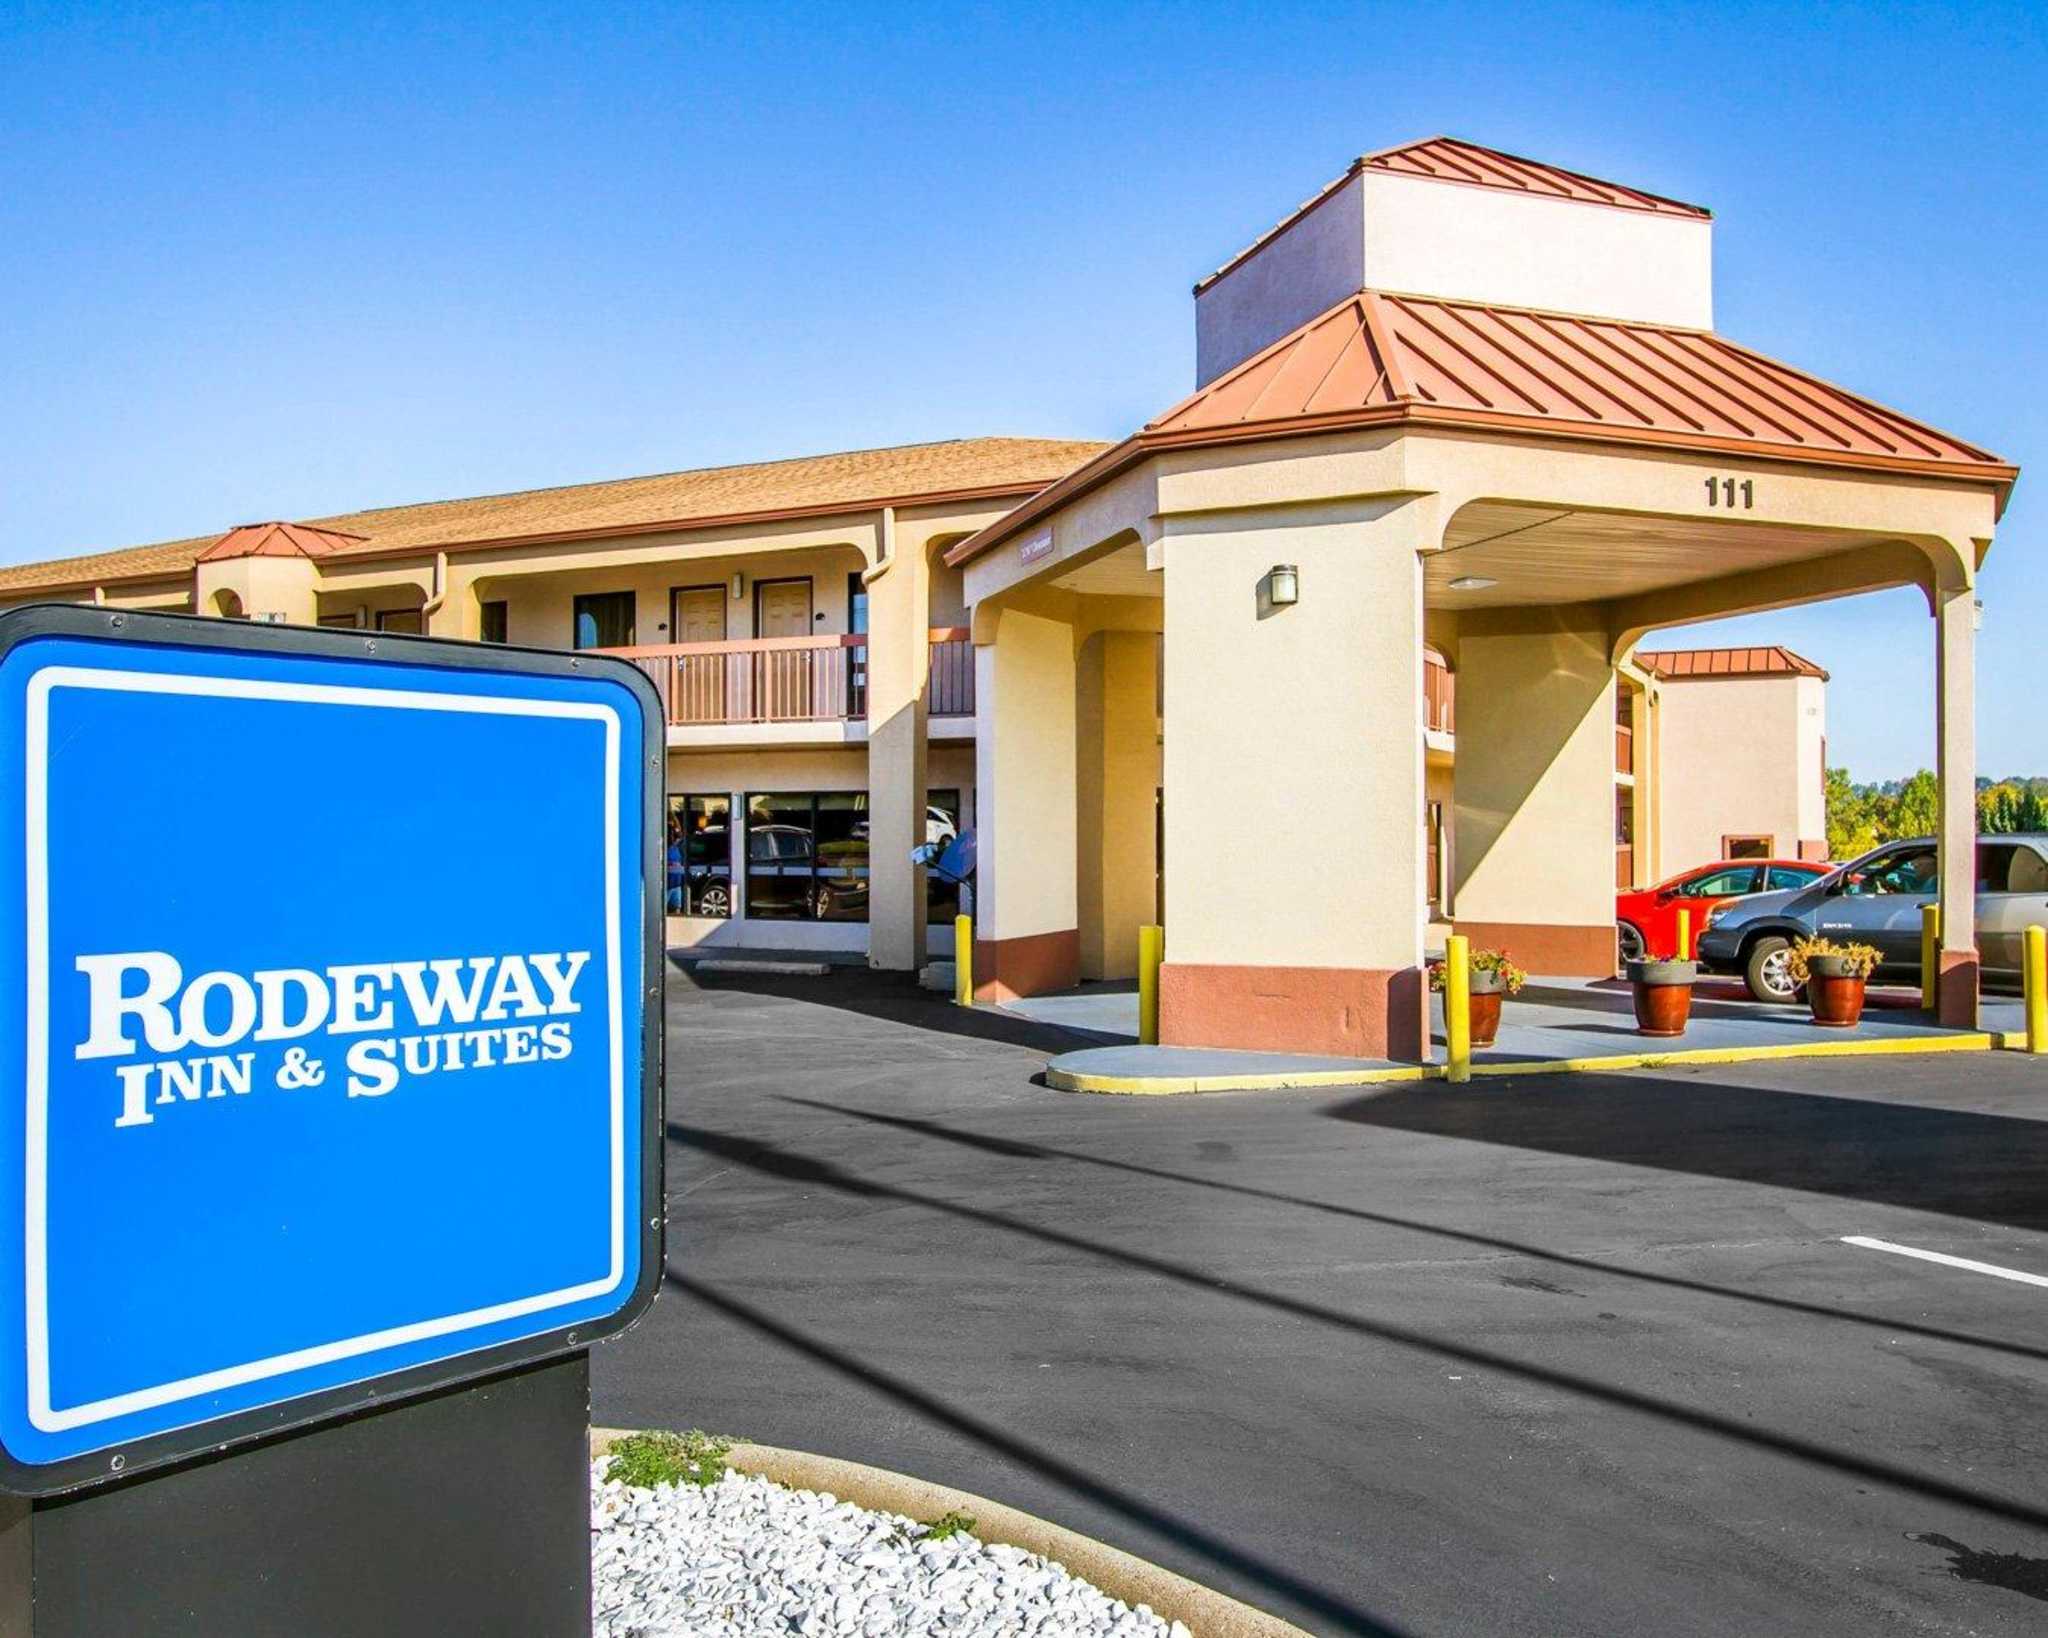 Rodeway Inn & Suites Coupons near me in Clarksville, TN ...